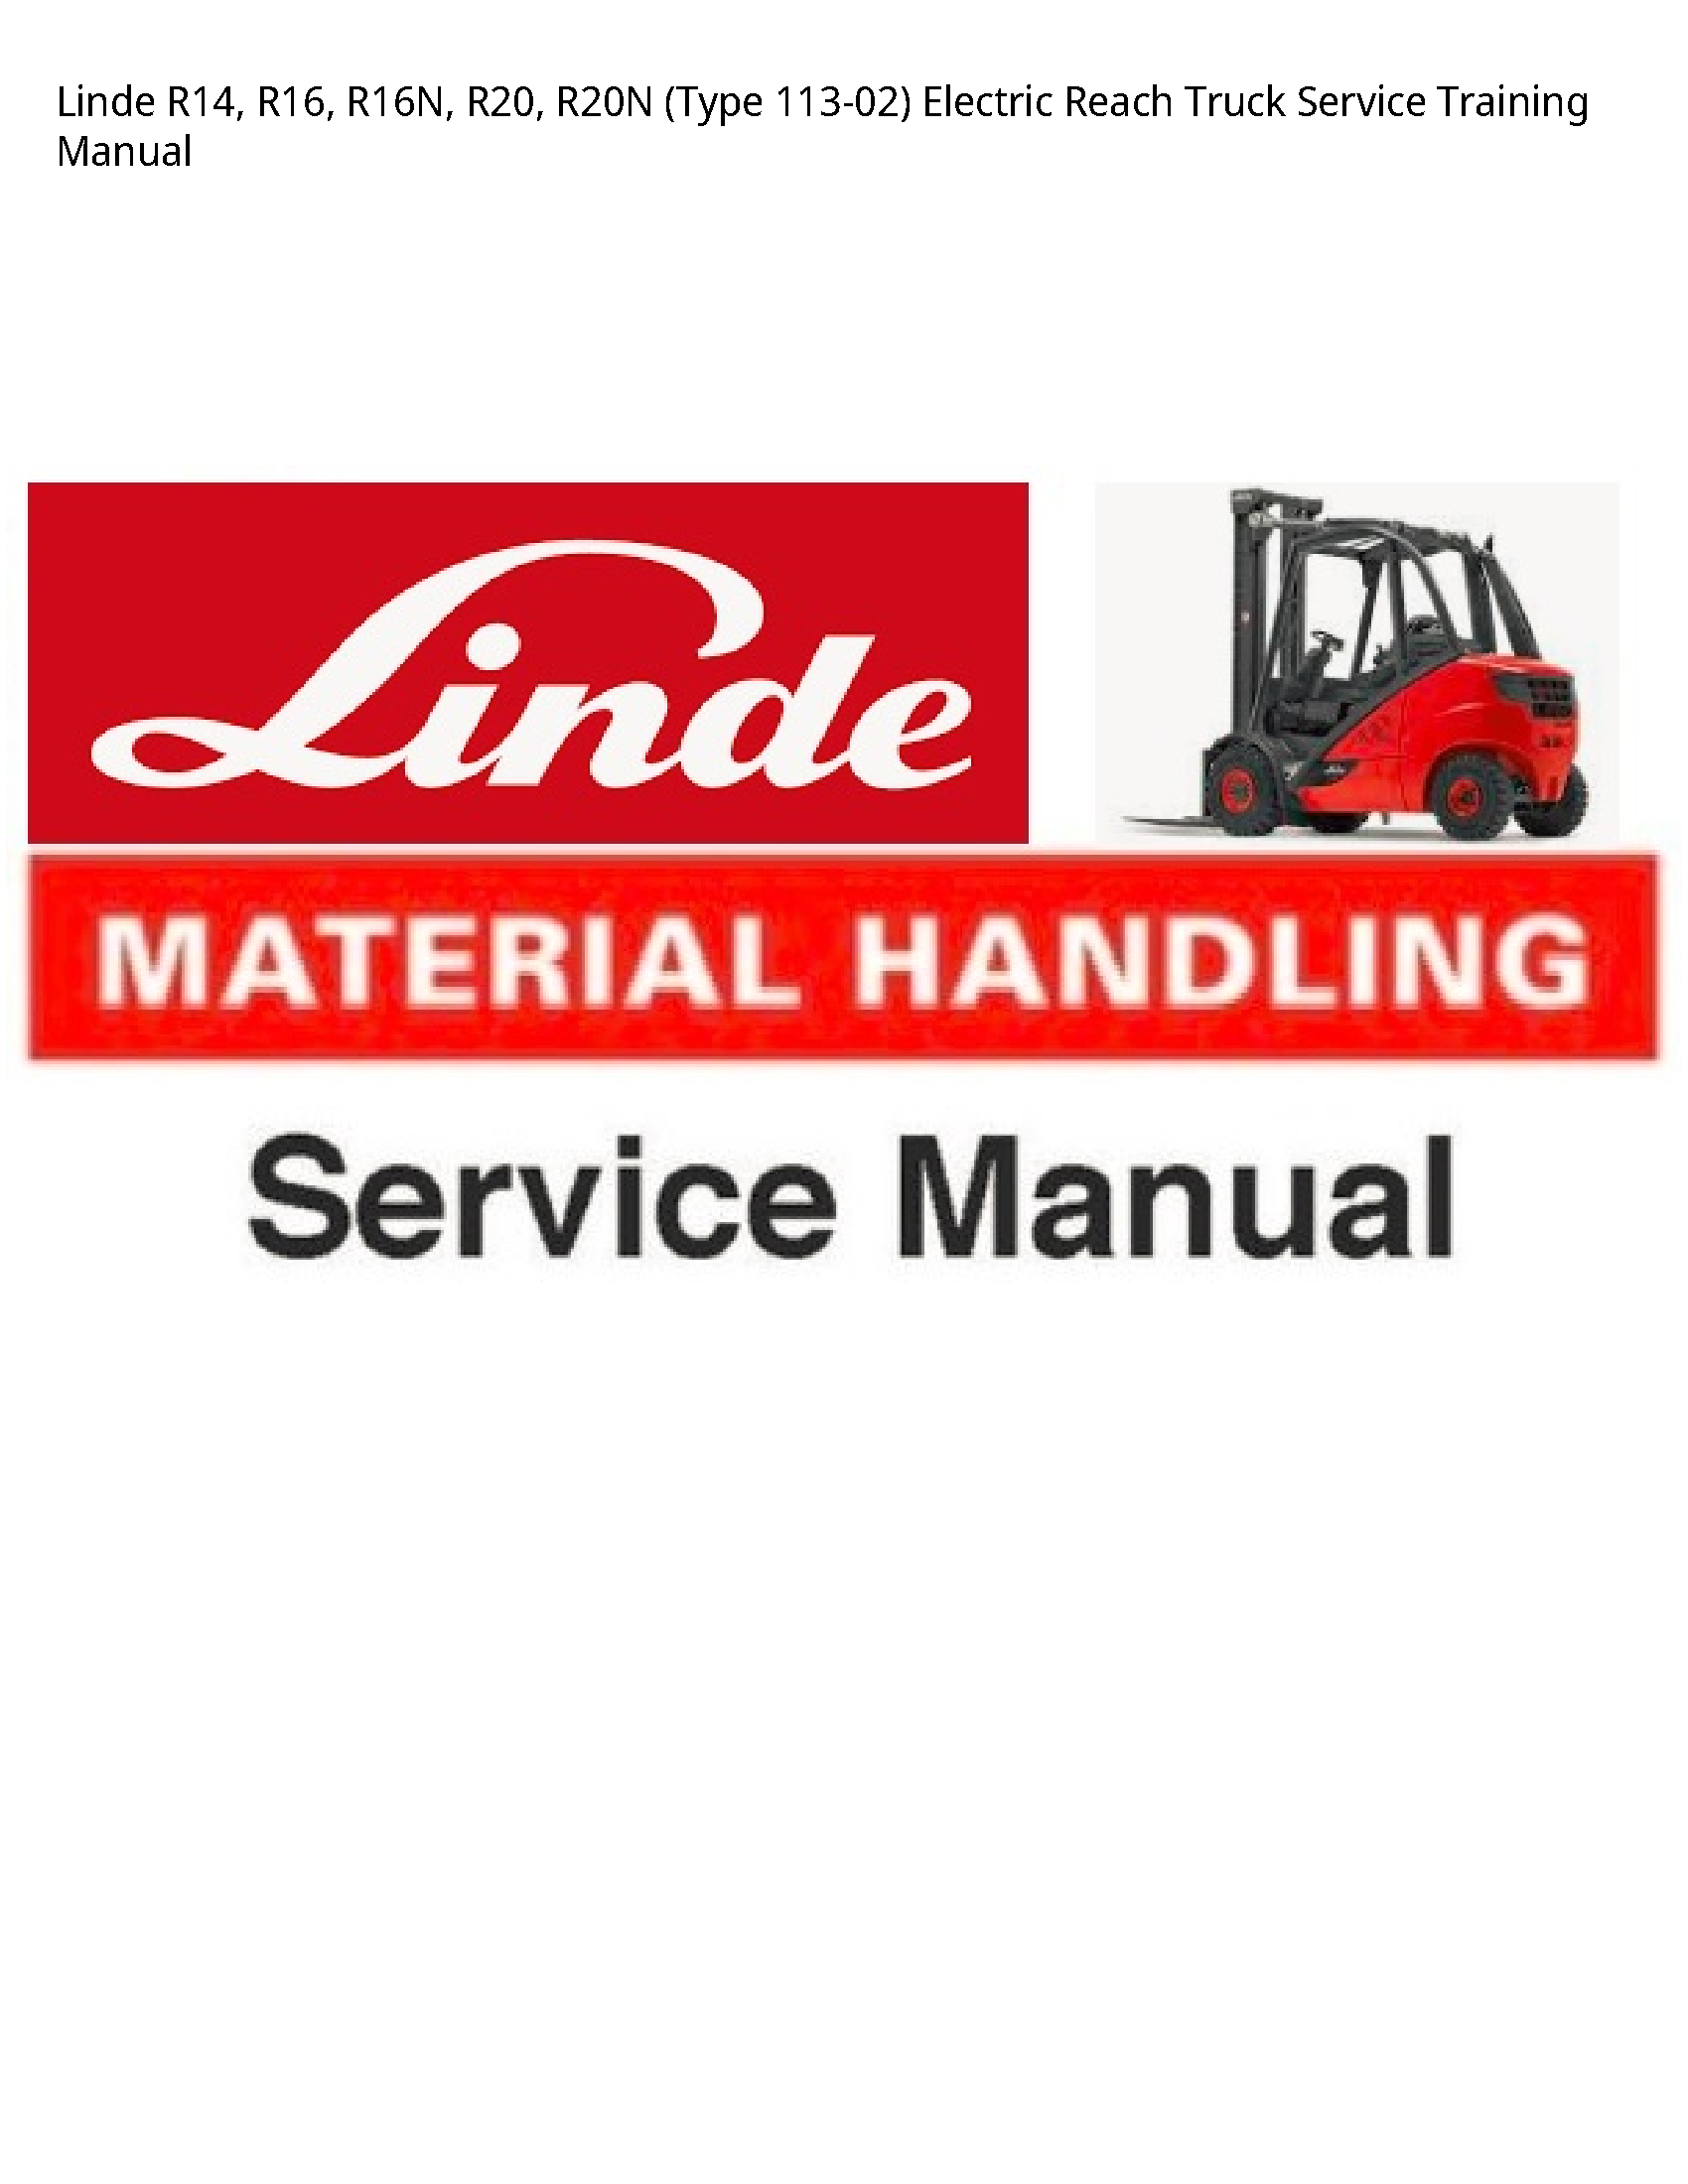 Linde R14 (Type Electric Reach Truck Service Training manual